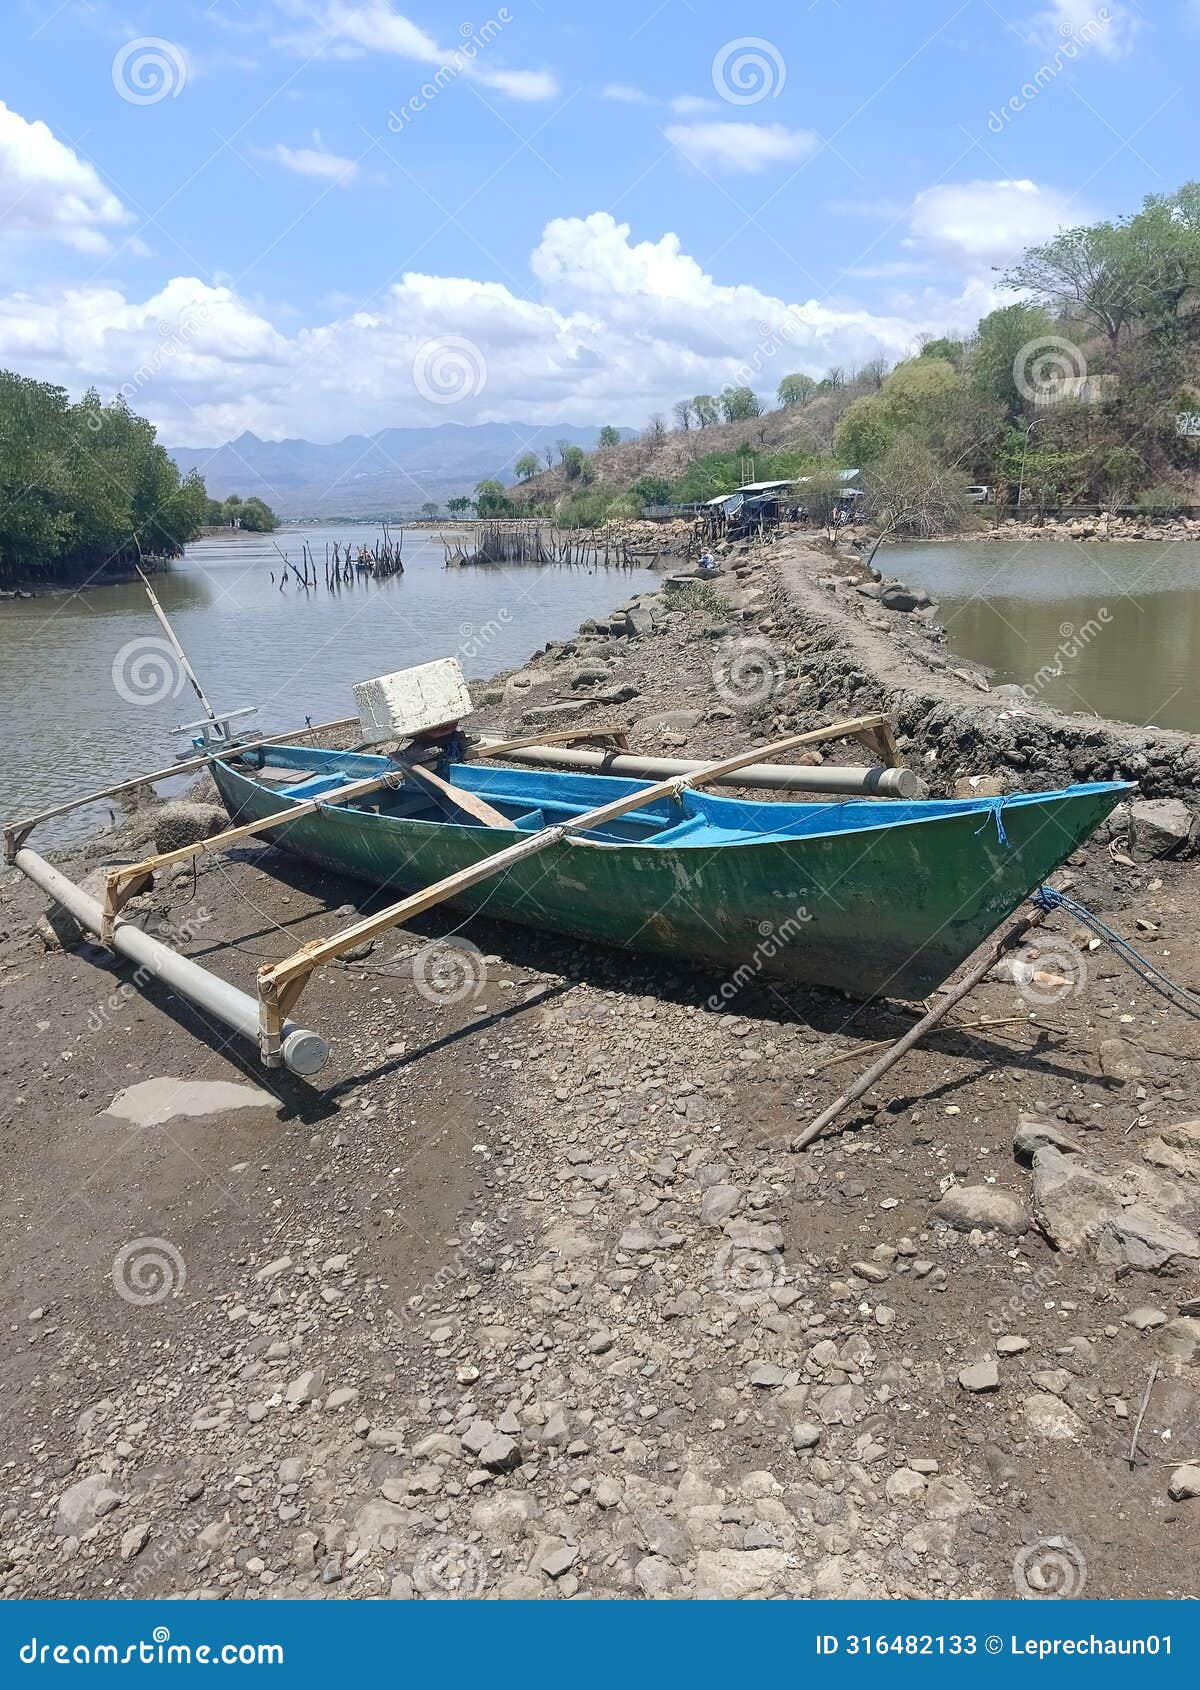 a fisherman, that boat is not already to used